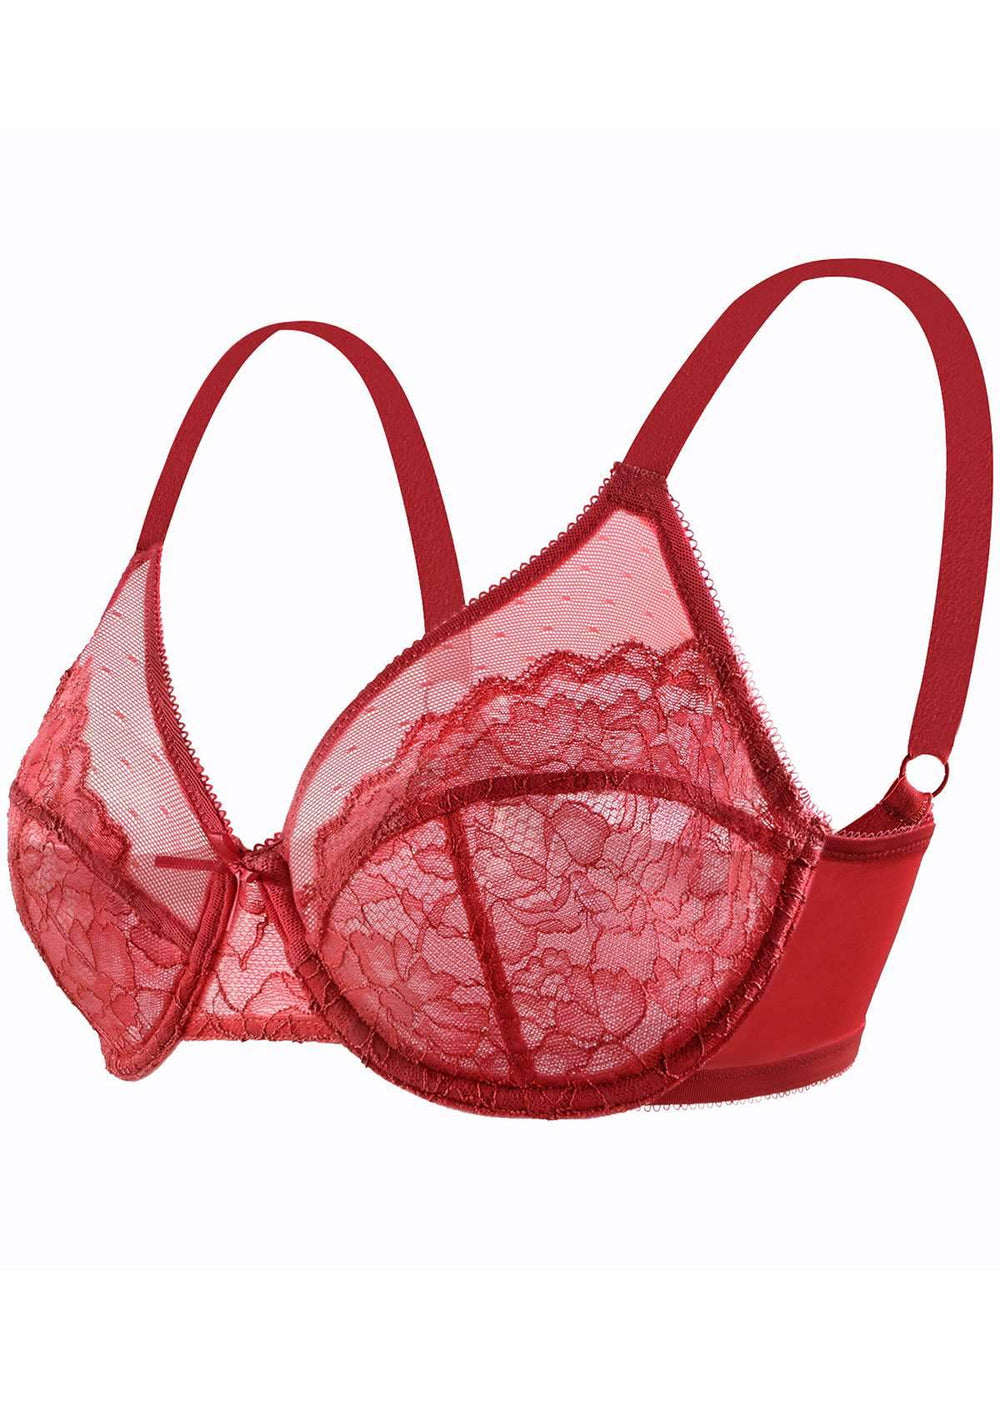 Barely Breezies Set of 2 Underwire Lined Mesh Bras ($52) ❤ liked